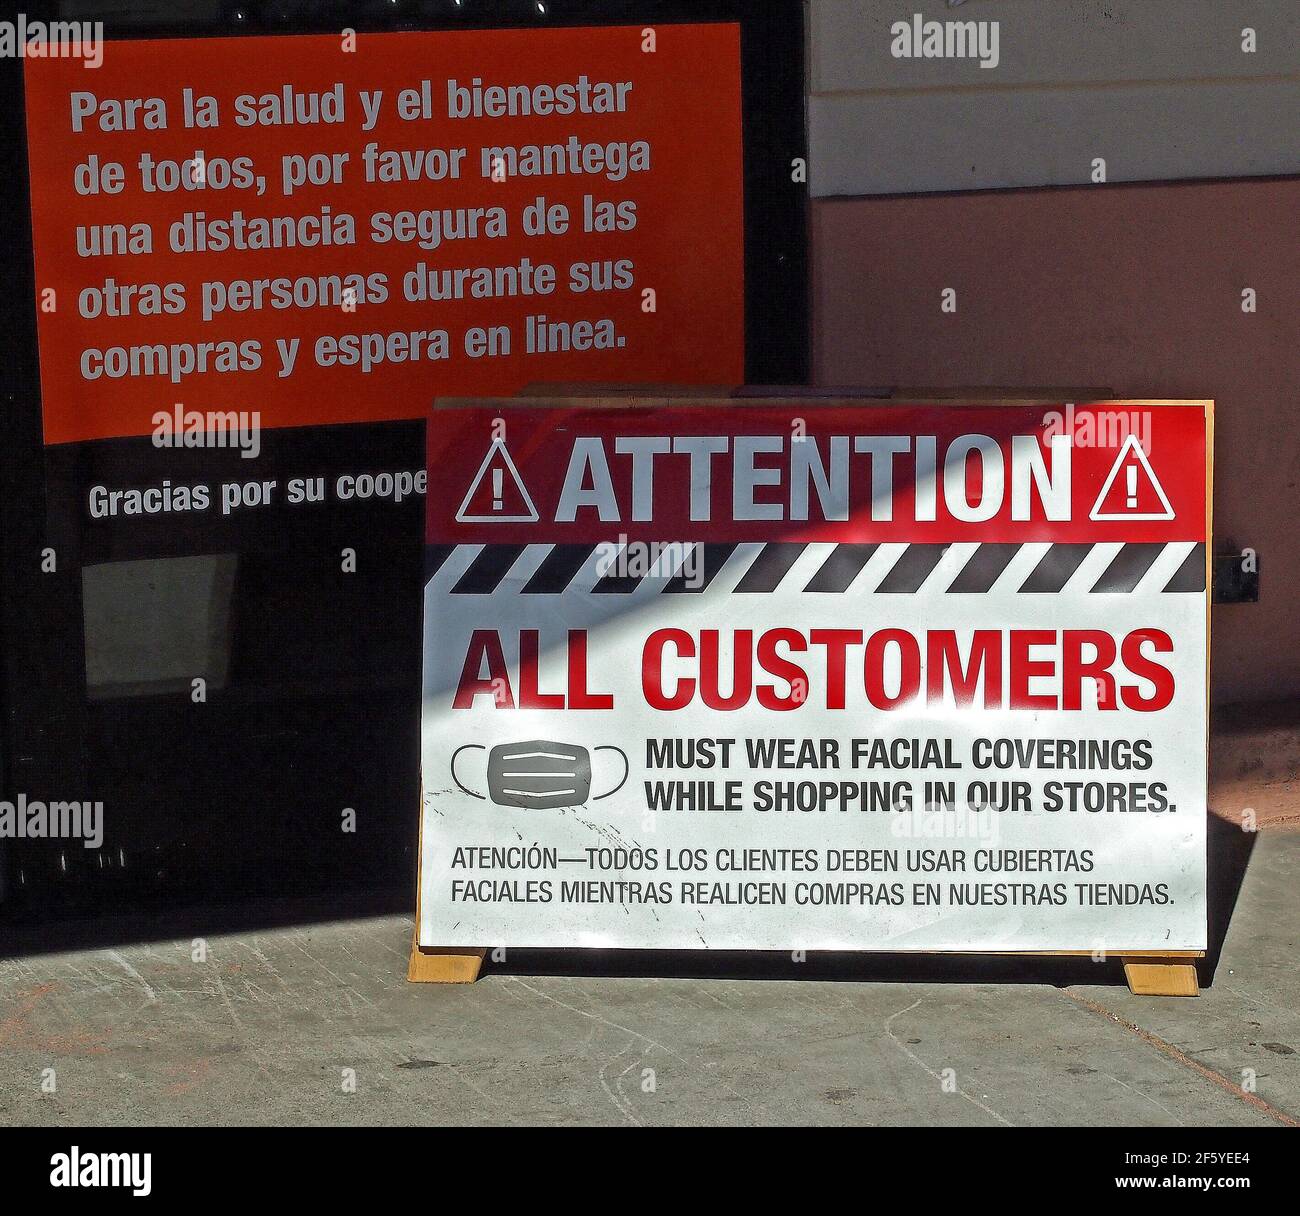 Attention all customers must wear facial coverings while shopping in our store sign at entrance to the Home Depot store in Union City, California, Stock Photo